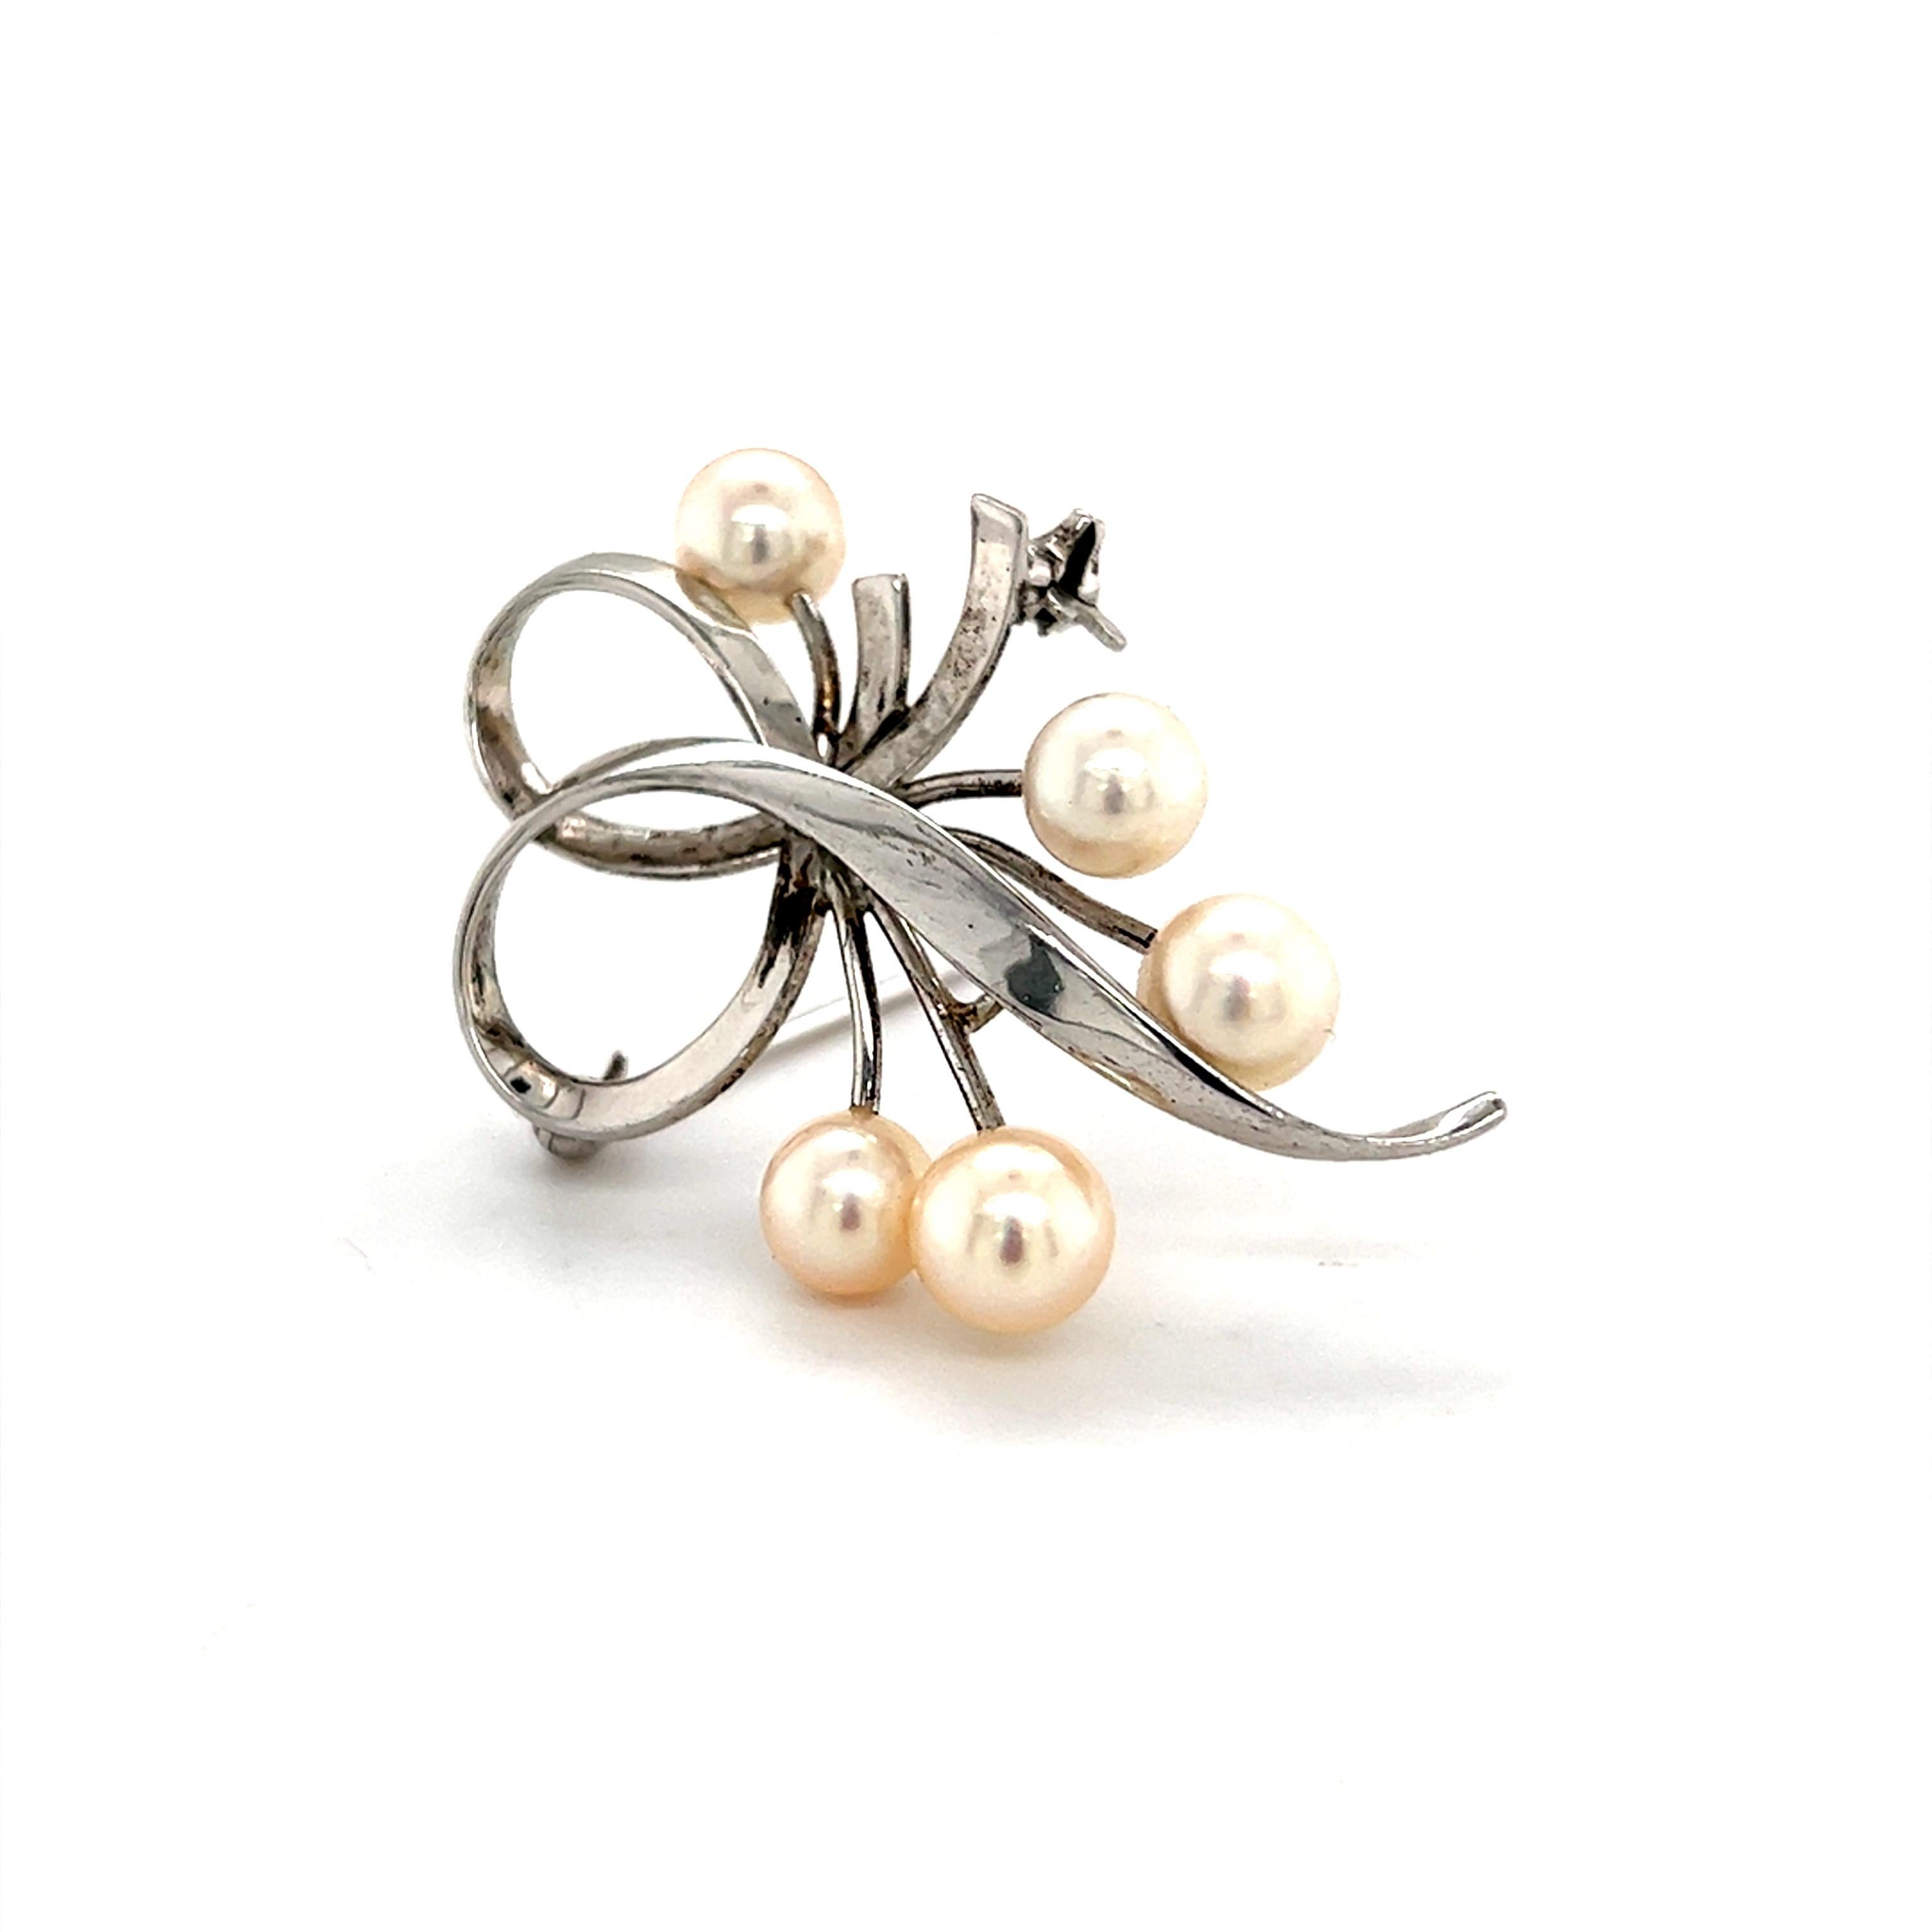 Mikimoto Estate Akoya Pearl Brooch Sterling Silver 6.6 mm 5.2 Grams In Good Condition For Sale In Brooklyn, NY